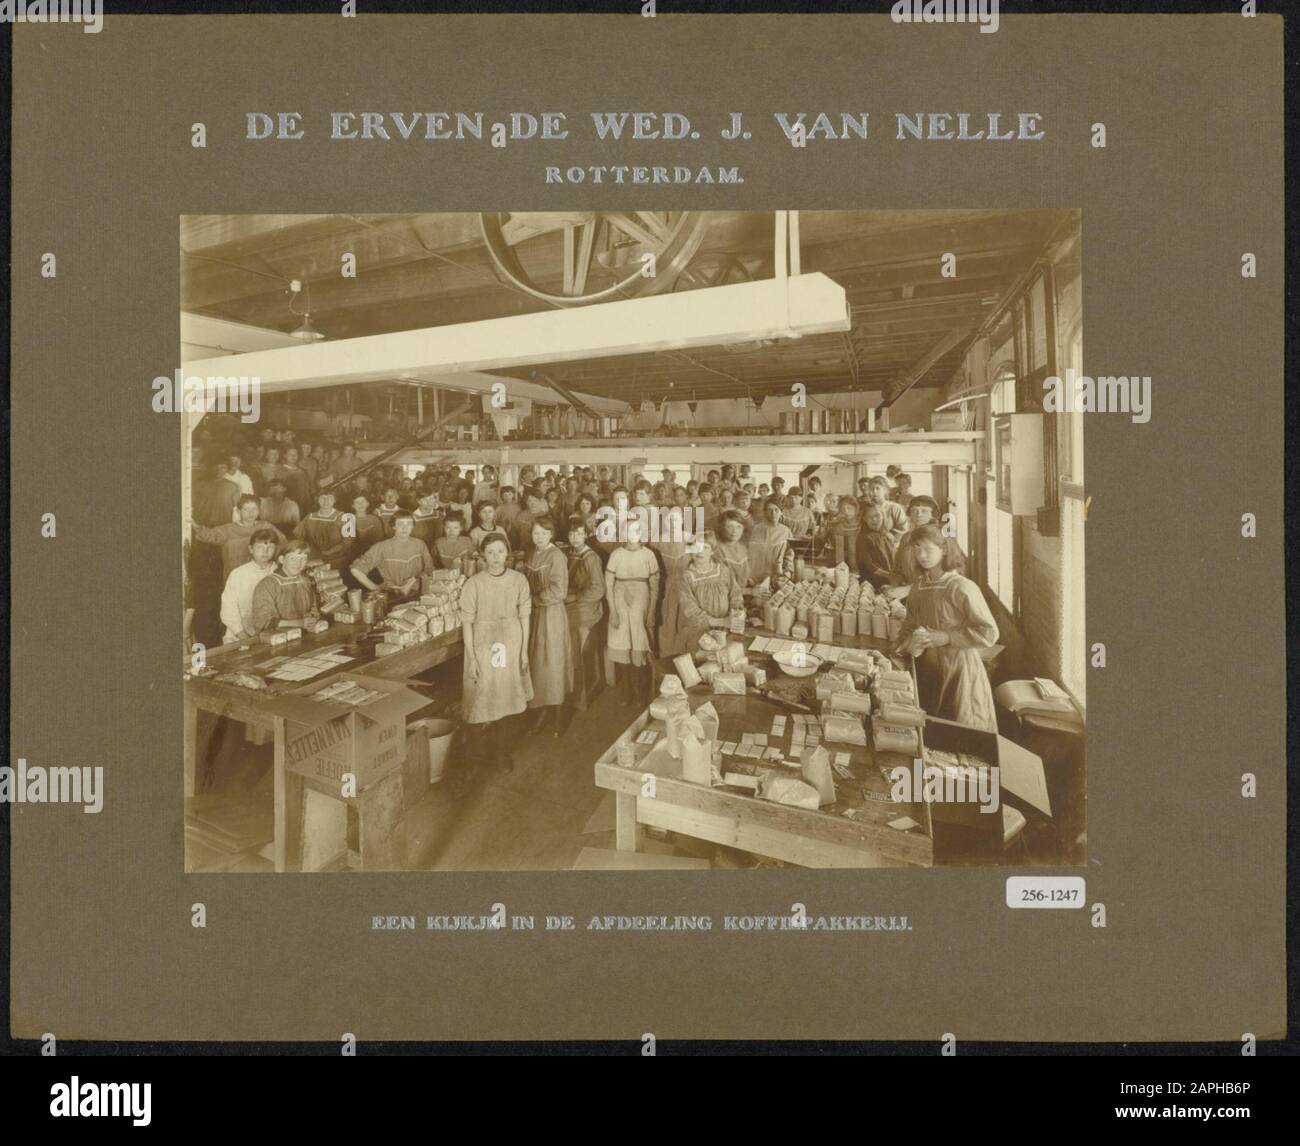 Description: The coffee packing department at the factory of the heirs the bet. J. van Nelle, Rotterdam. This is one of the photographs submitted by the Labour Inspectorate for the exhibition 'Education van den Jeugd over den school age', The Hague, July 16 - August 14, 1919 Date: Approximately 1919 Stock Photo